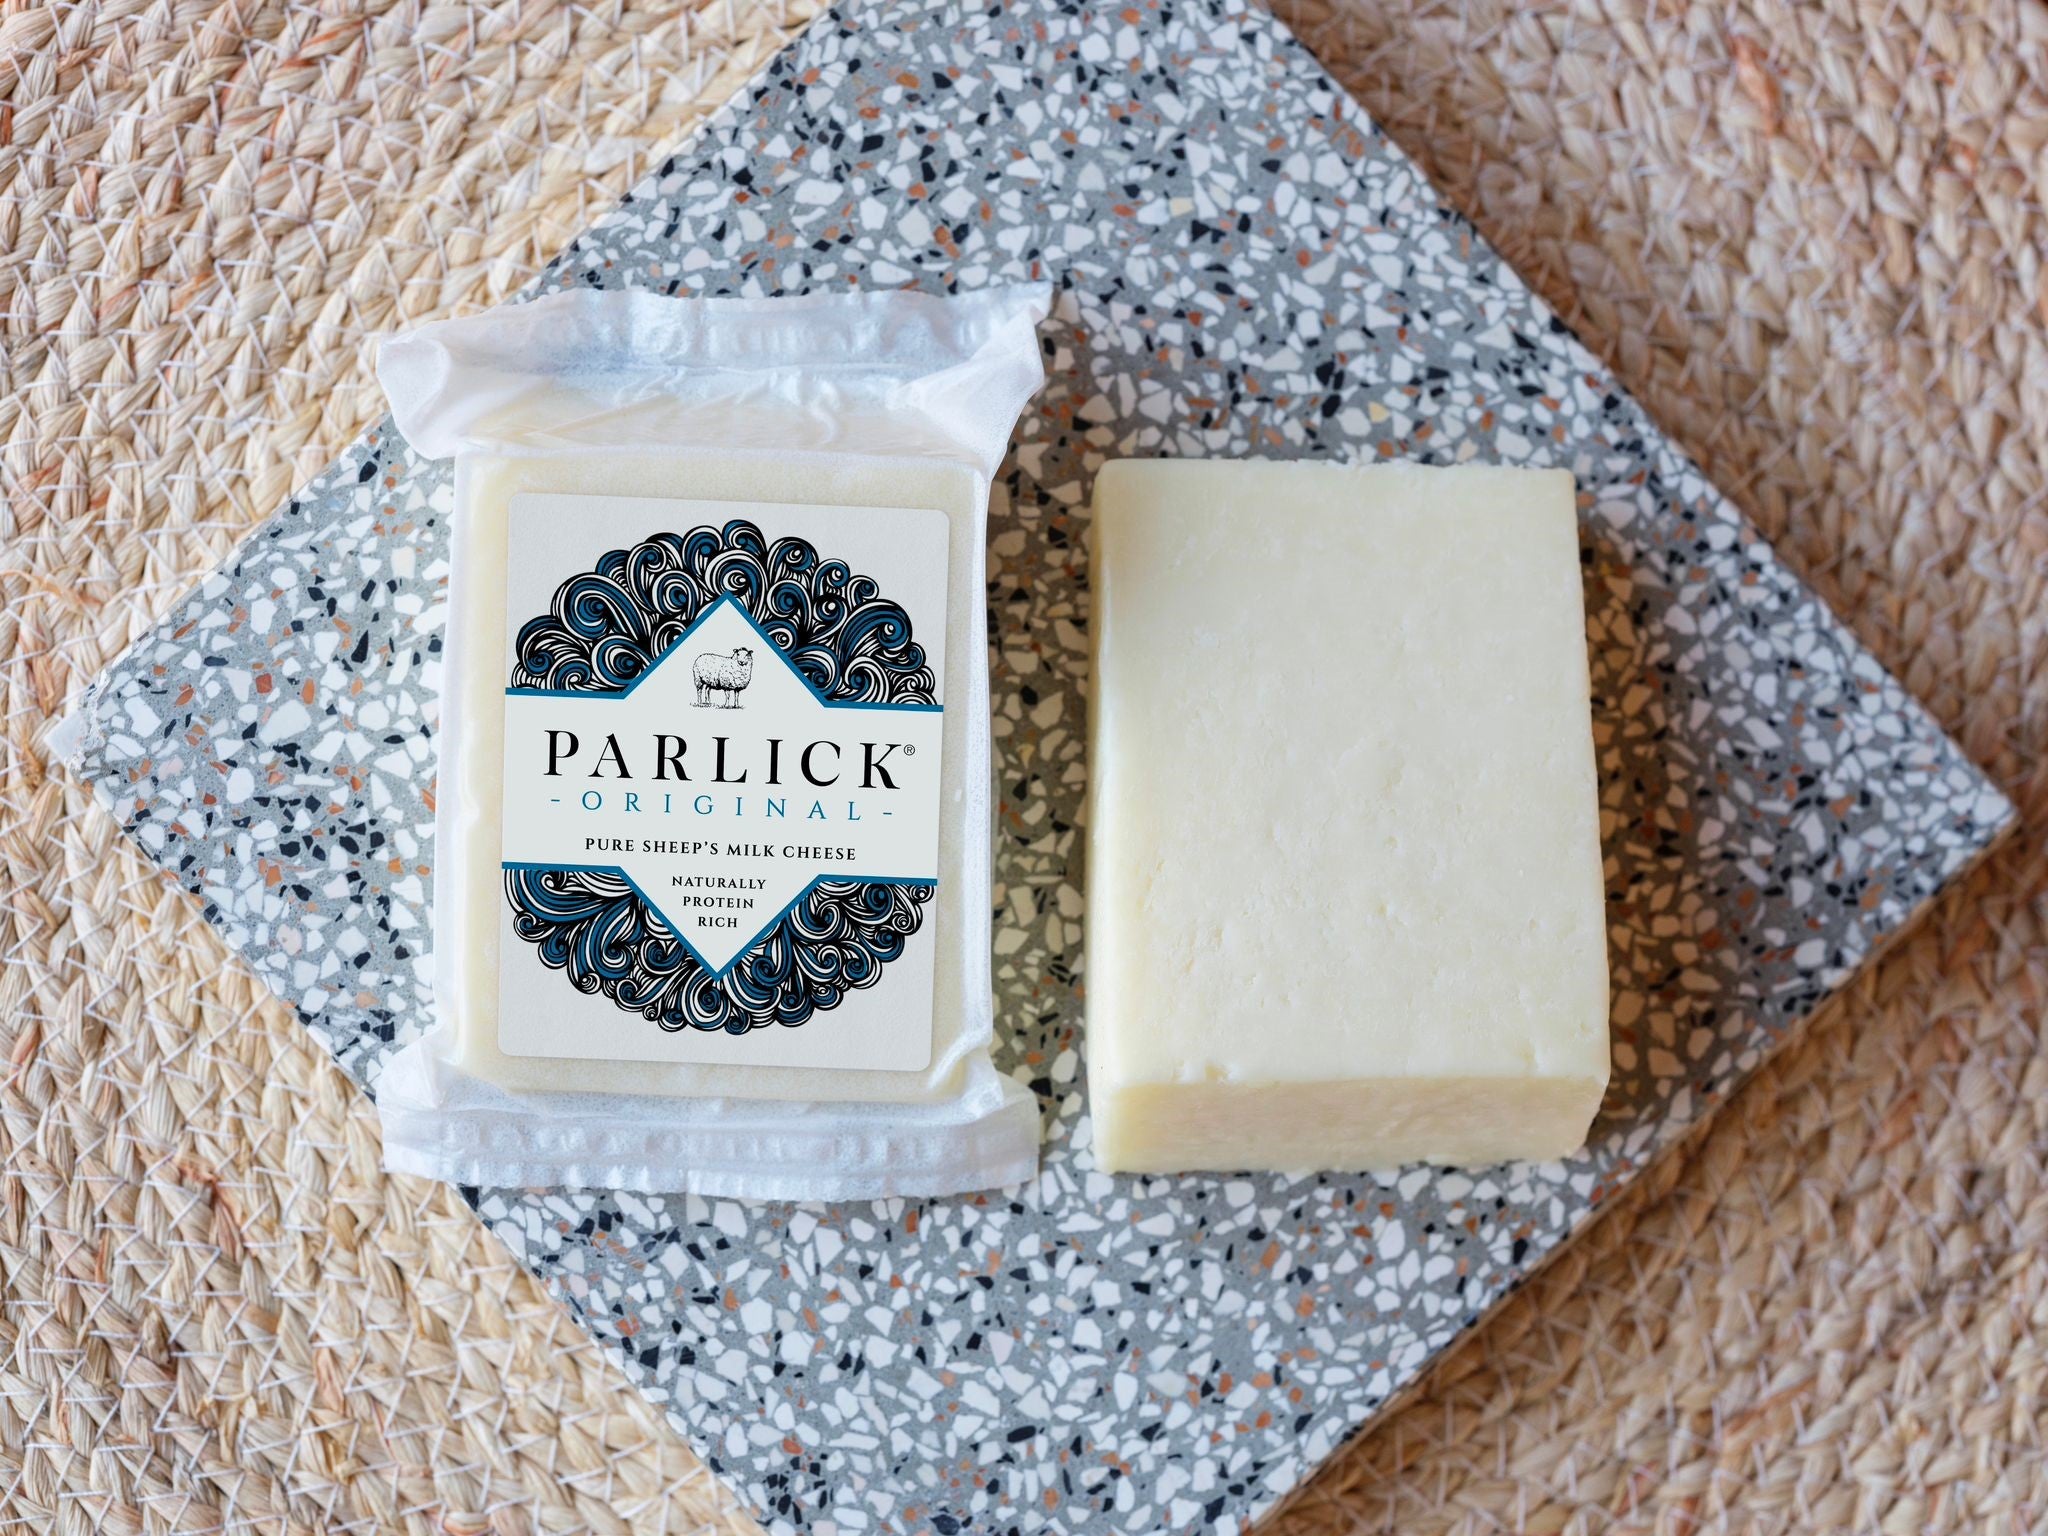 Introducing Parlick: Our New Sheep's Cheese